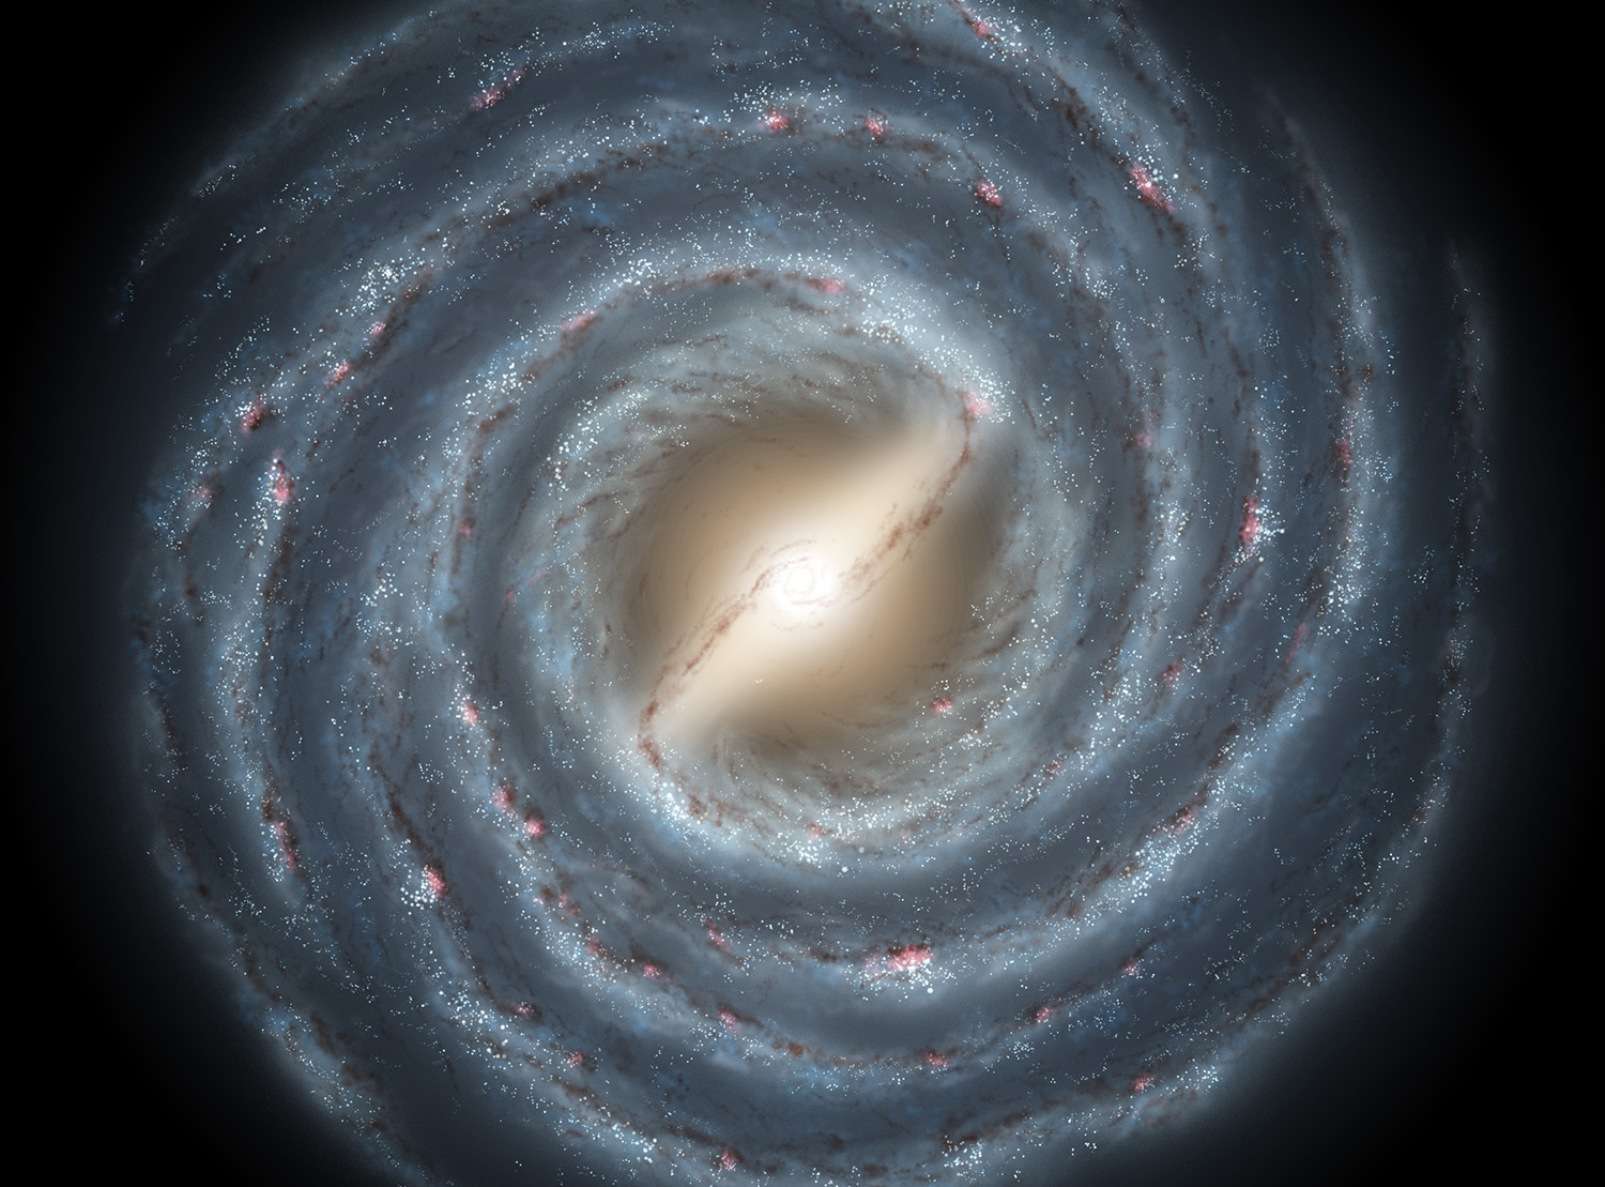 Astronomers have discovered the original core of the Milky Way